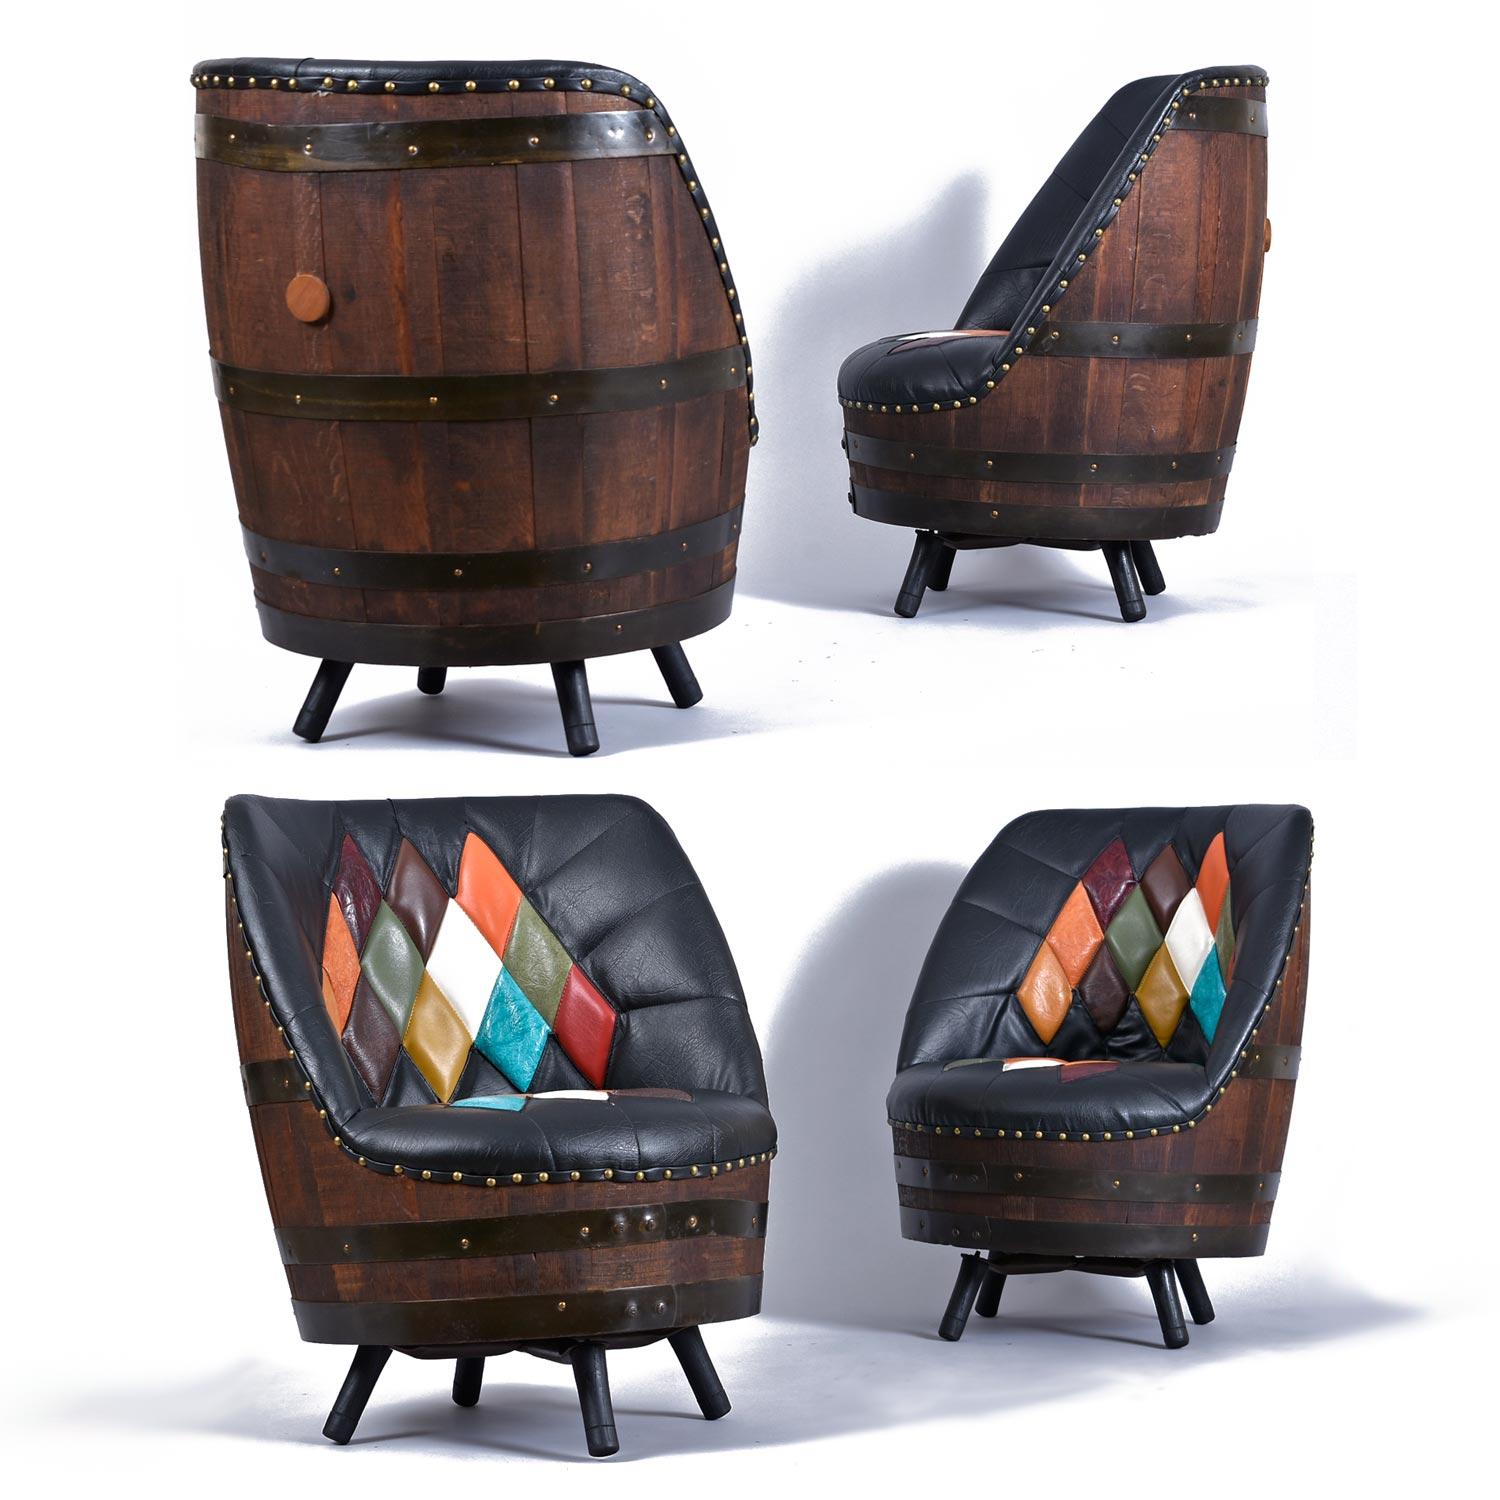 Vintage whisky barrel dining set made by Brothers Furniture Corp. of Livermore, Kentucky. Who knows whiskey better than Kentucky? This 48